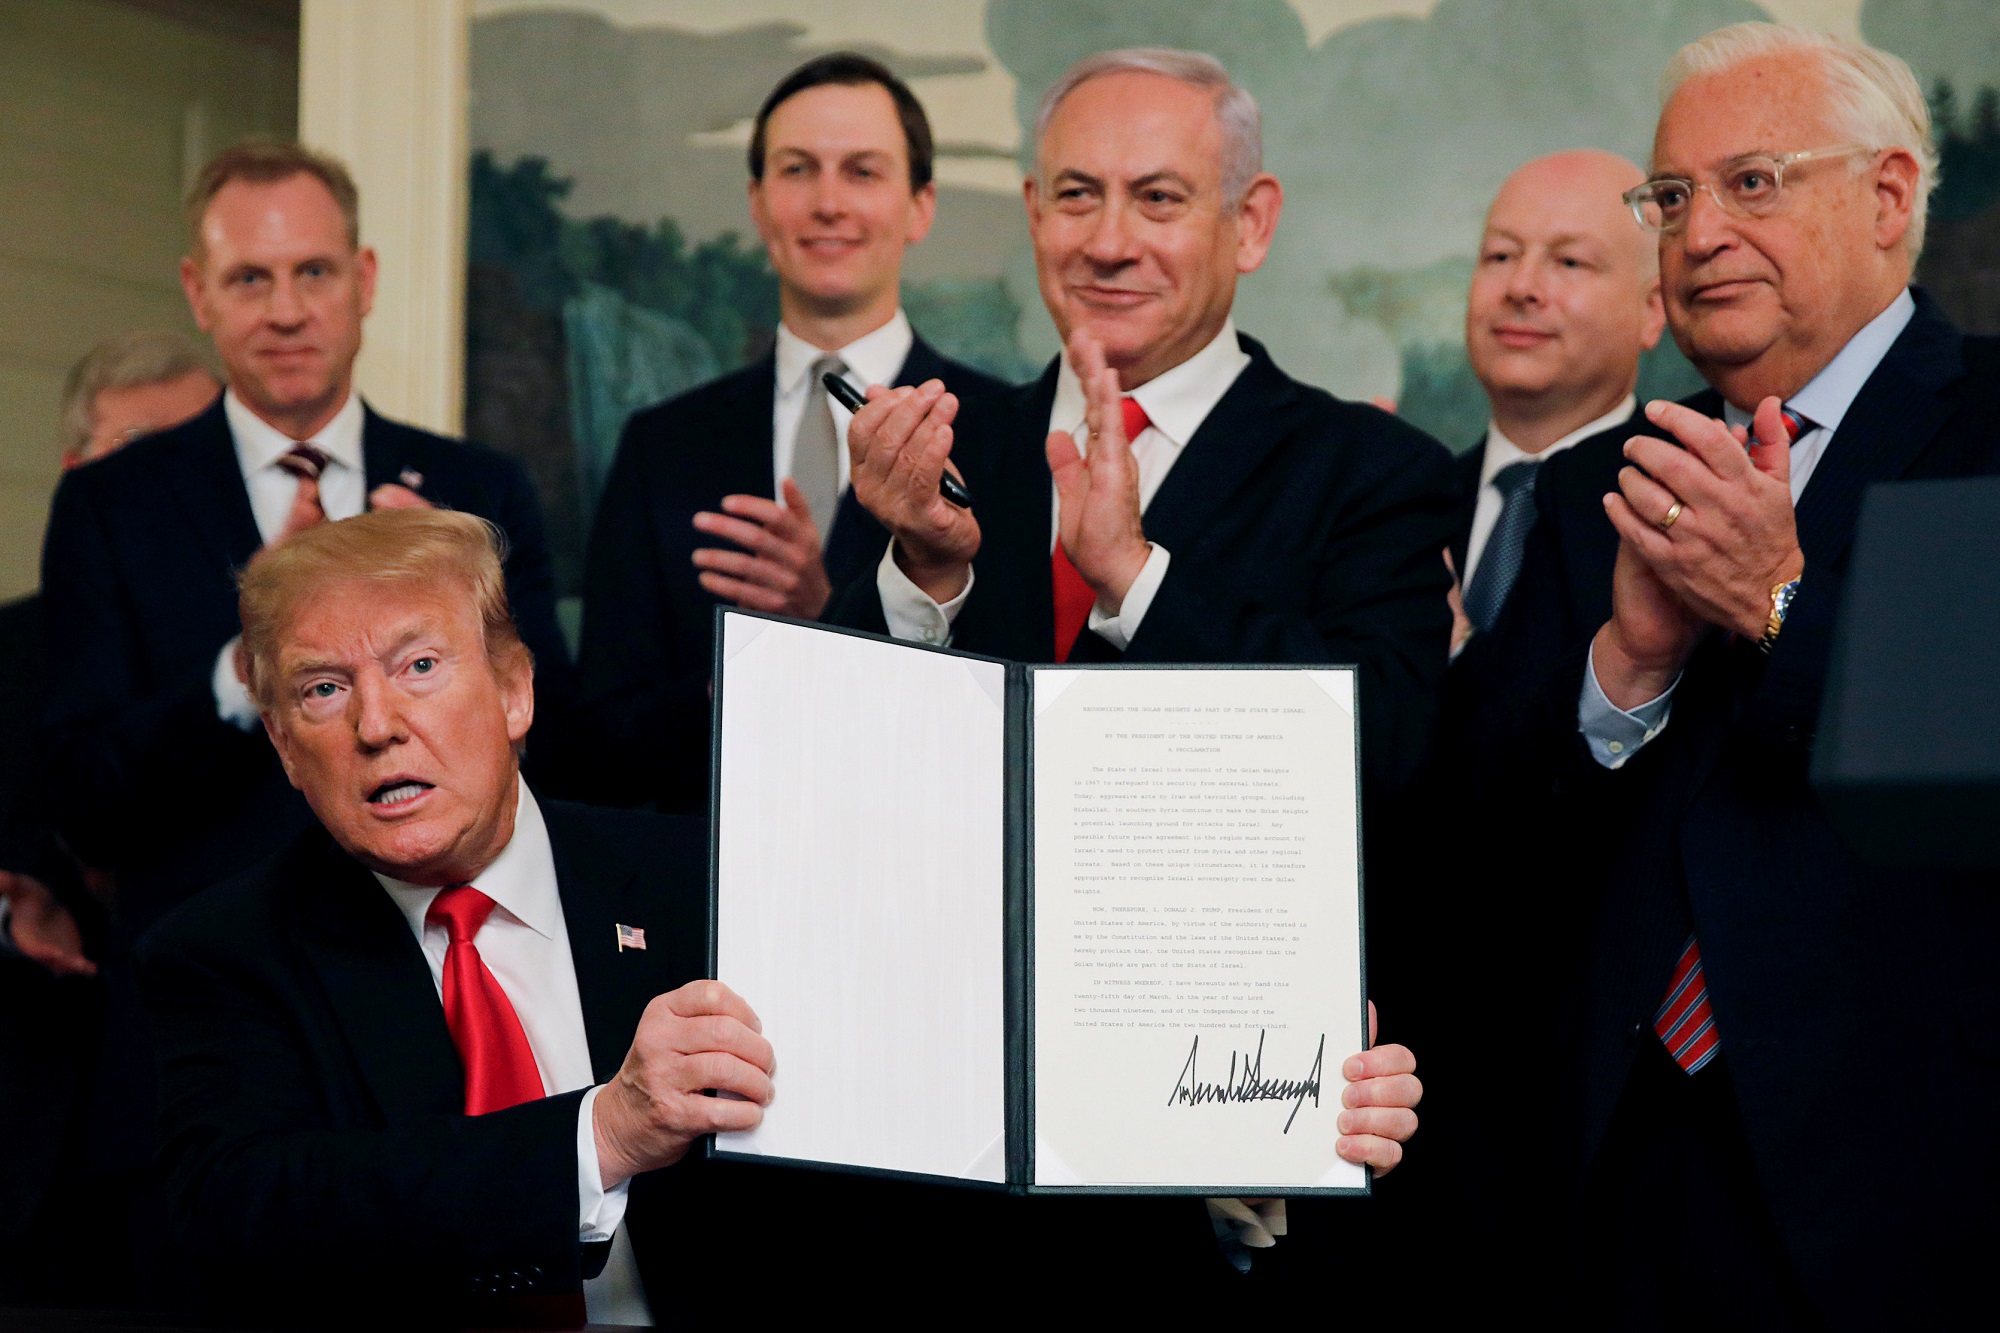 US President Donald Trump holds a proclamation recognising Israelu00e2u20acu2122s sovereignty over the Golan Heights as he is applauded by Israelu00e2u20acu2122s Prime Minister Benjamin Netanyahu and others at the White House in Washington, US, March 25, 2019. u00e2u20acu201d Reuters pic